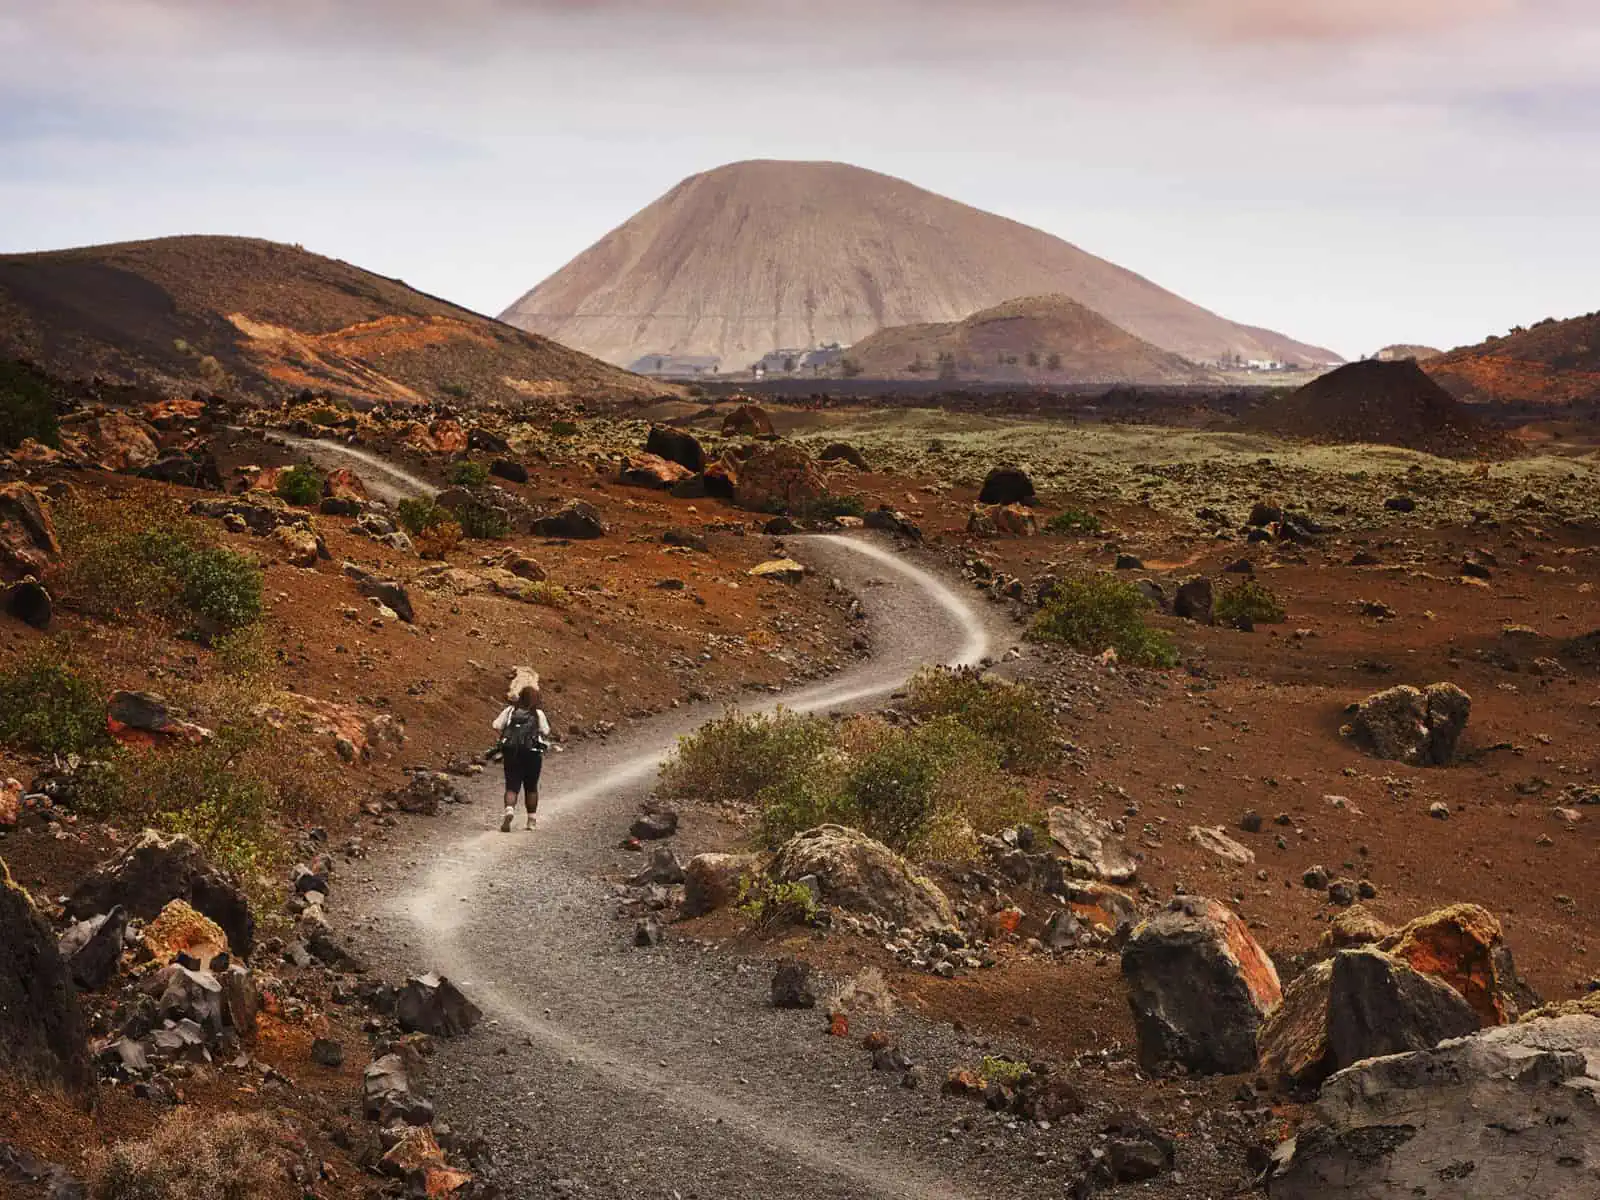 𝘐𝘮𝘢𝘨𝘦 𝘥𝘦𝘴𝘤𝘳𝘪𝘱𝘵𝘪𝘰𝘯: Landscape image. Fay is walking along a path through a volcanic, mountainous landscape with her back to the camera. There are many earthy colours that make up the scene - such as browns, reds and oranges. It is sli…